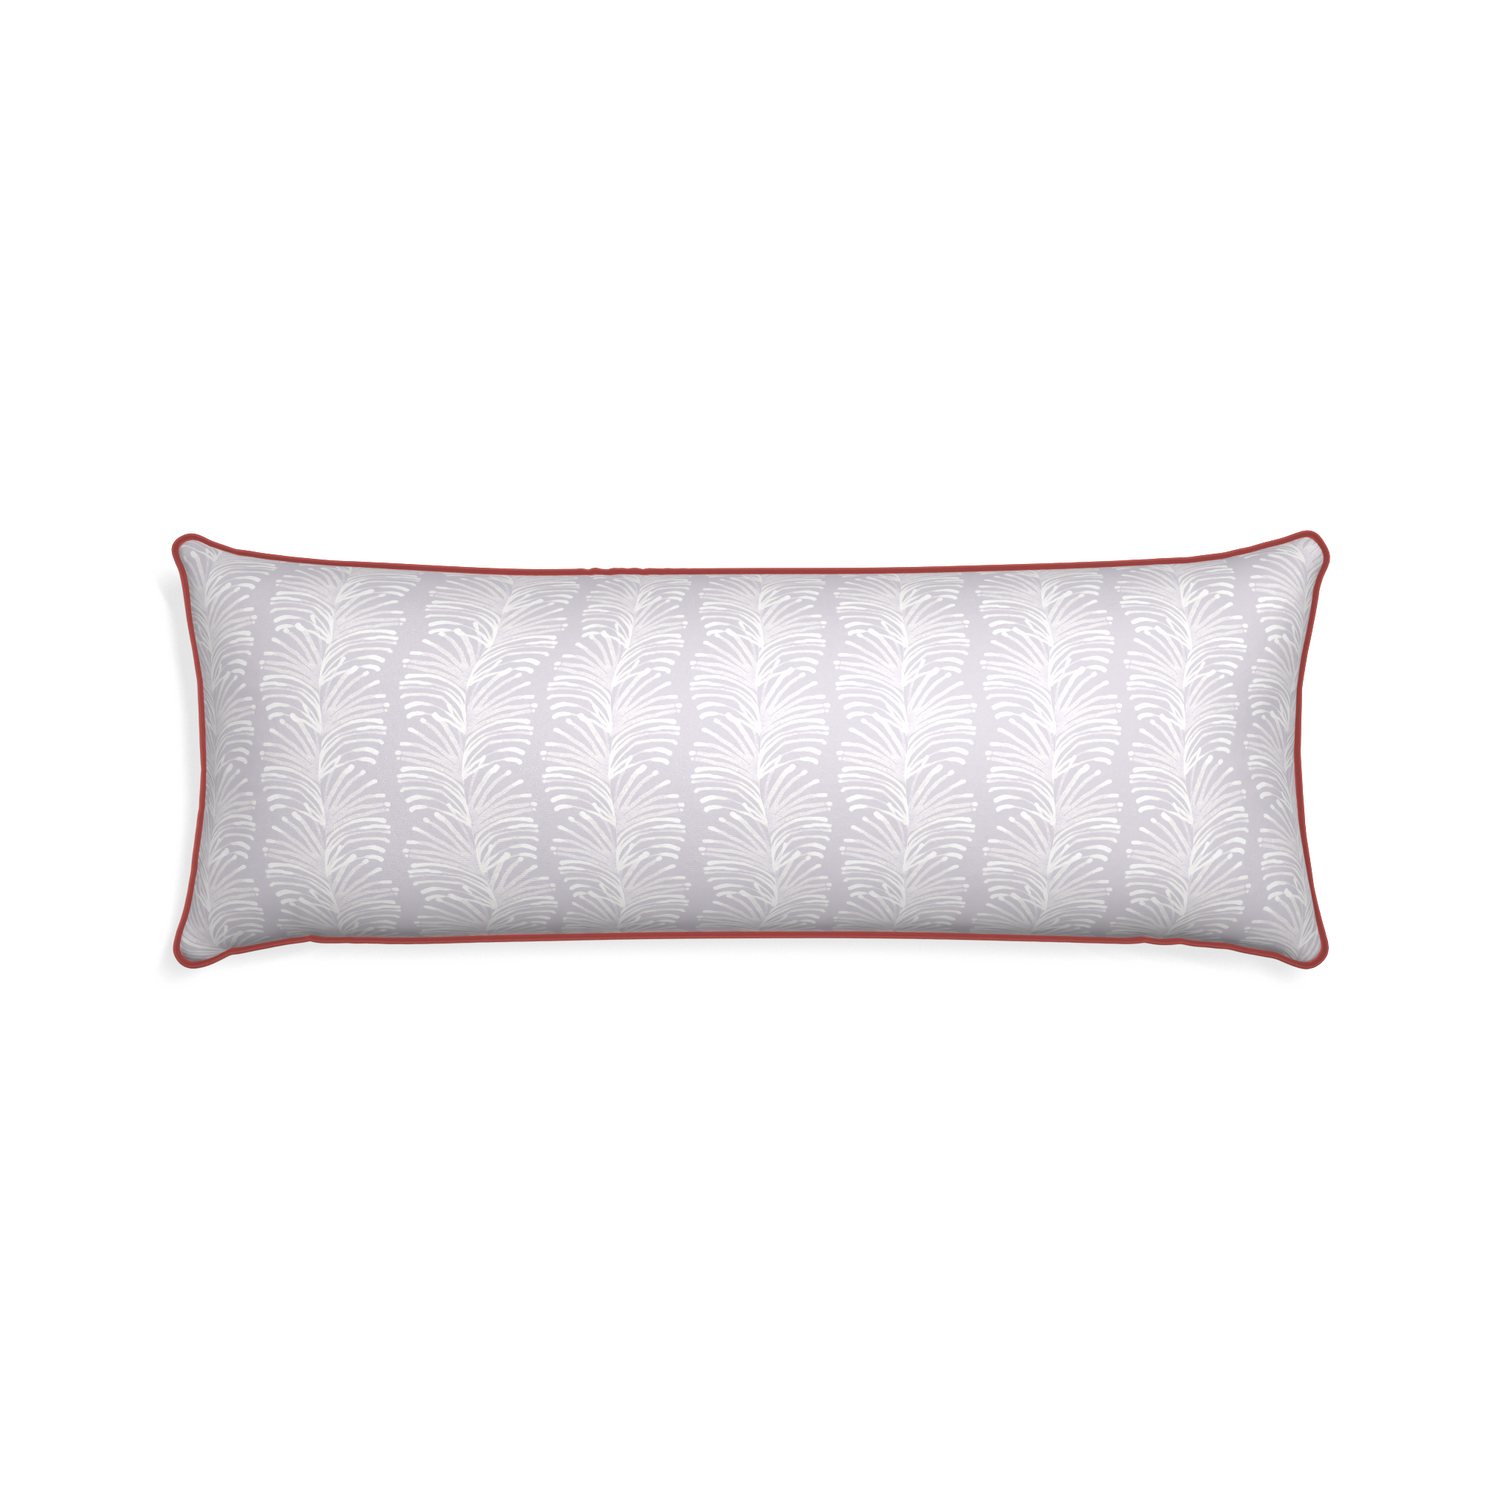 Xl-lumbar emma lavender custom pillow with c piping on white background